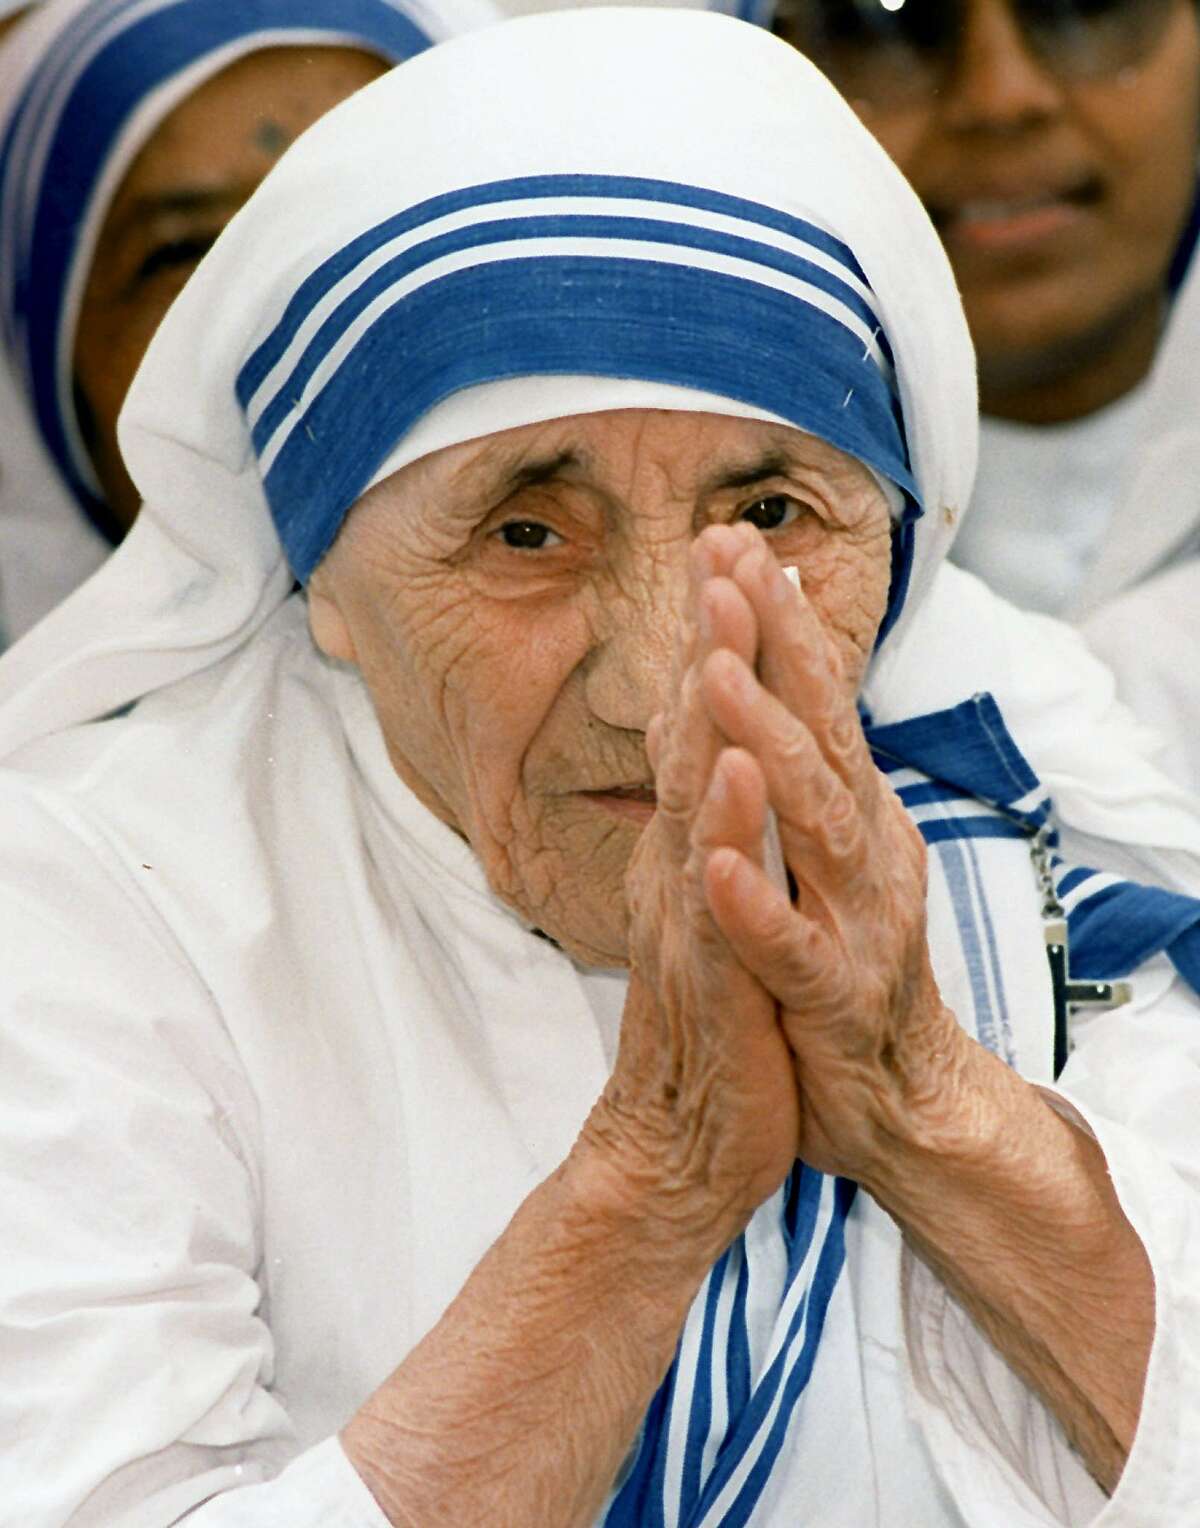 In this file photograph taken on May 15, 1997, Mother Teresa greets people at the Missionaries of Charity For Destitute Children in New Delhi. ( AFP / Getty Images)